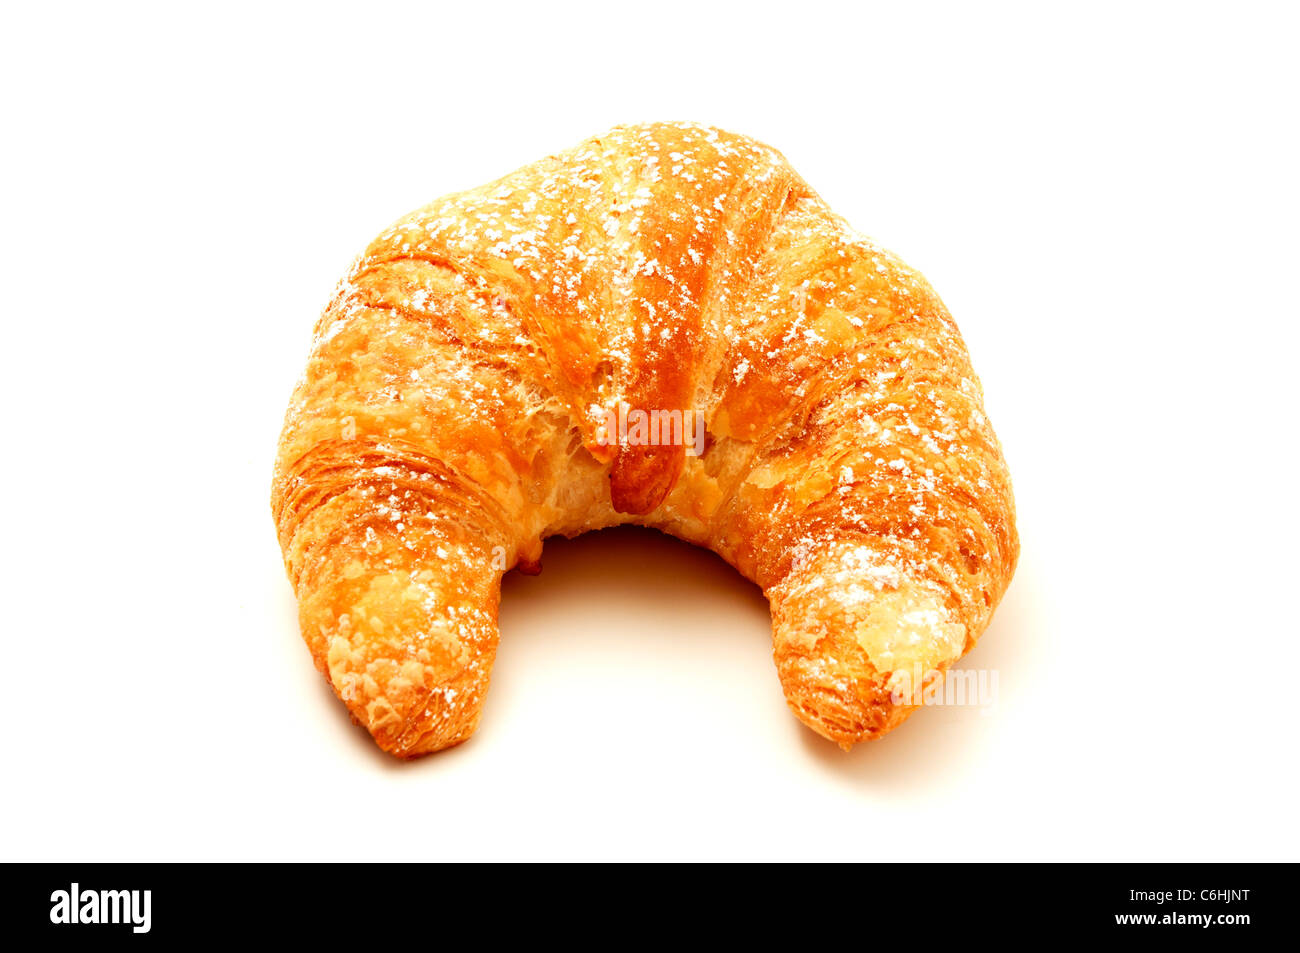 Croissant with powdered sugar on a white background Stock Photo